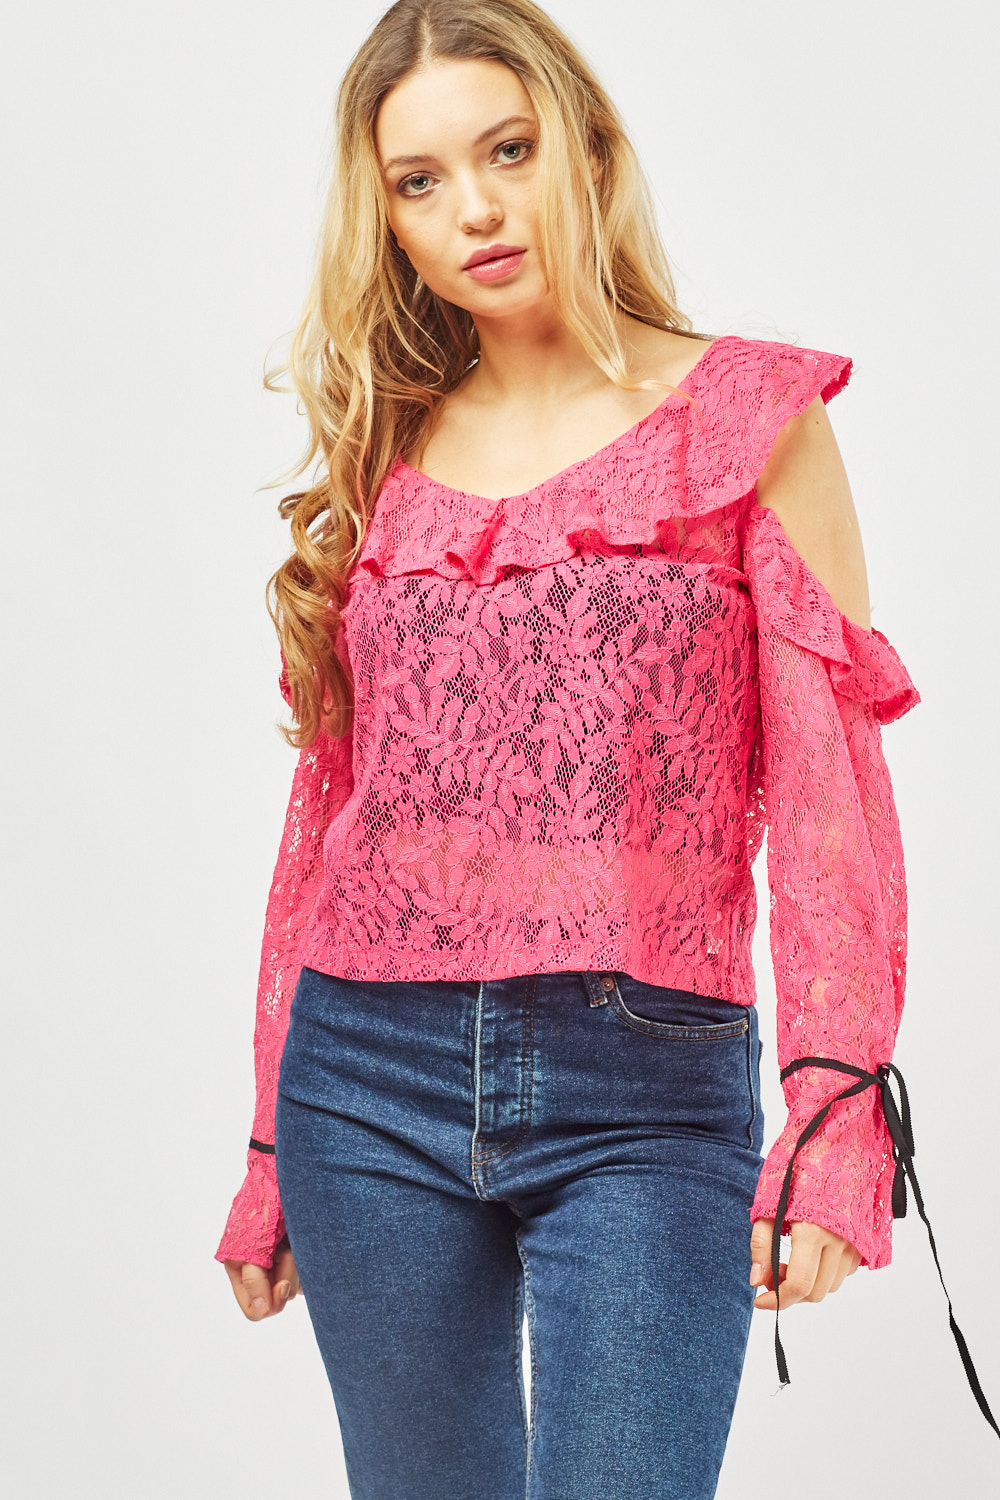 Cold Shoulder Ruffle Lace Top - Just $3